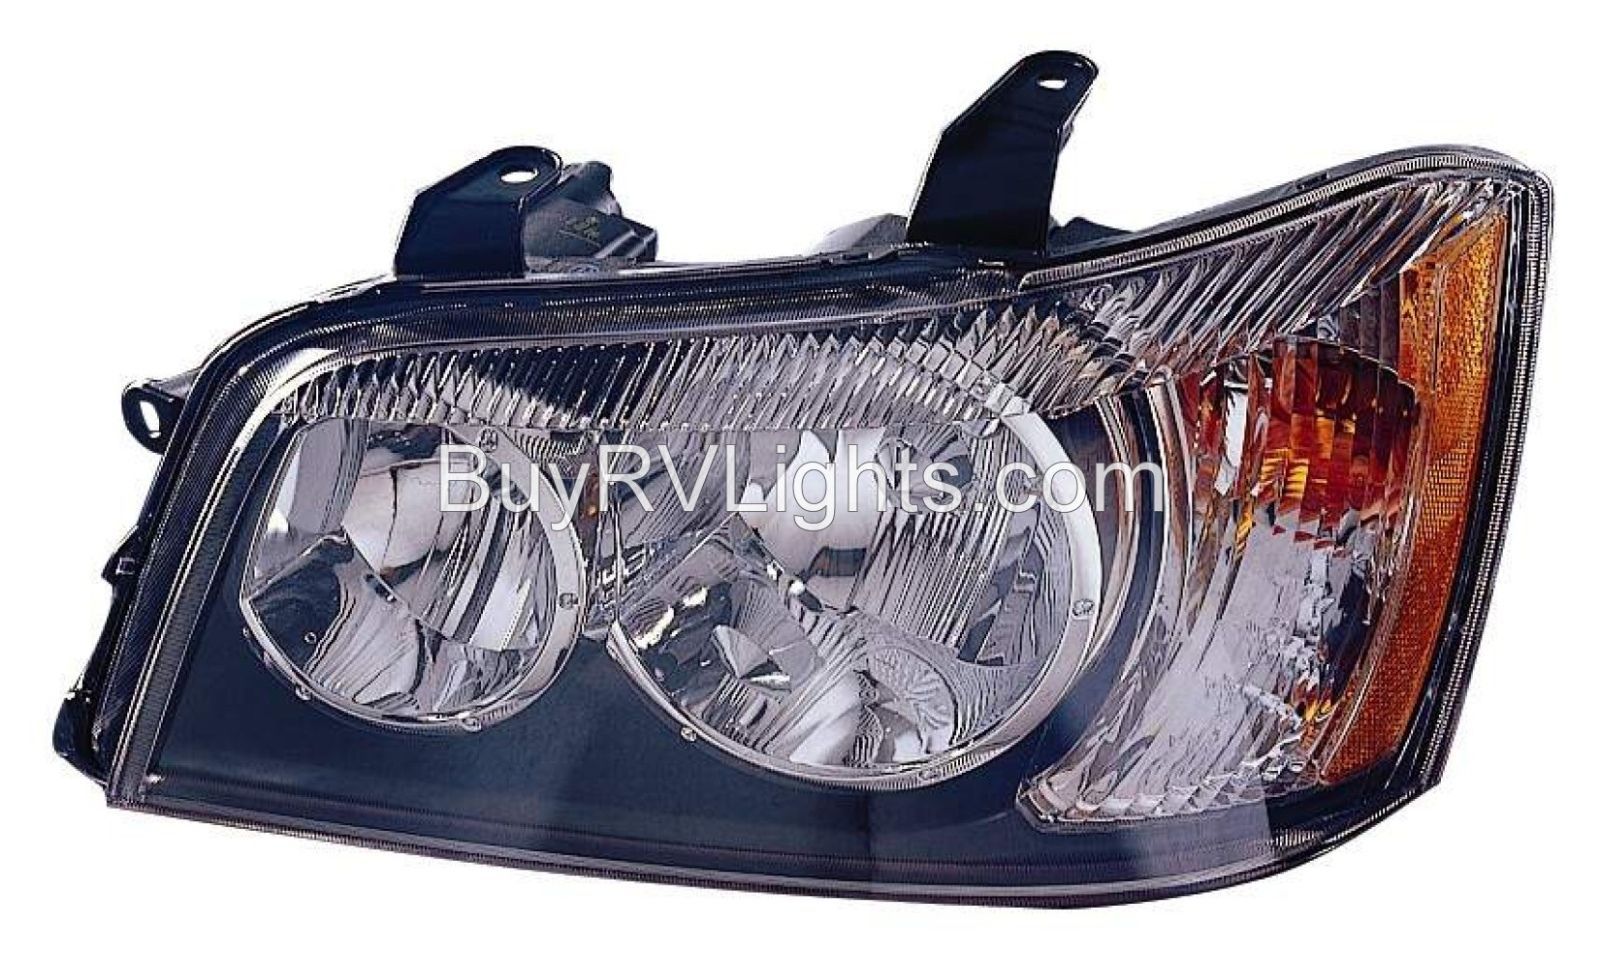 Primary image for FOREST RIVER BERKSHIRE 2014 2015 LEFT DRIVER HEAD LIGHT FRONT LAMP HEADLIGHT RV